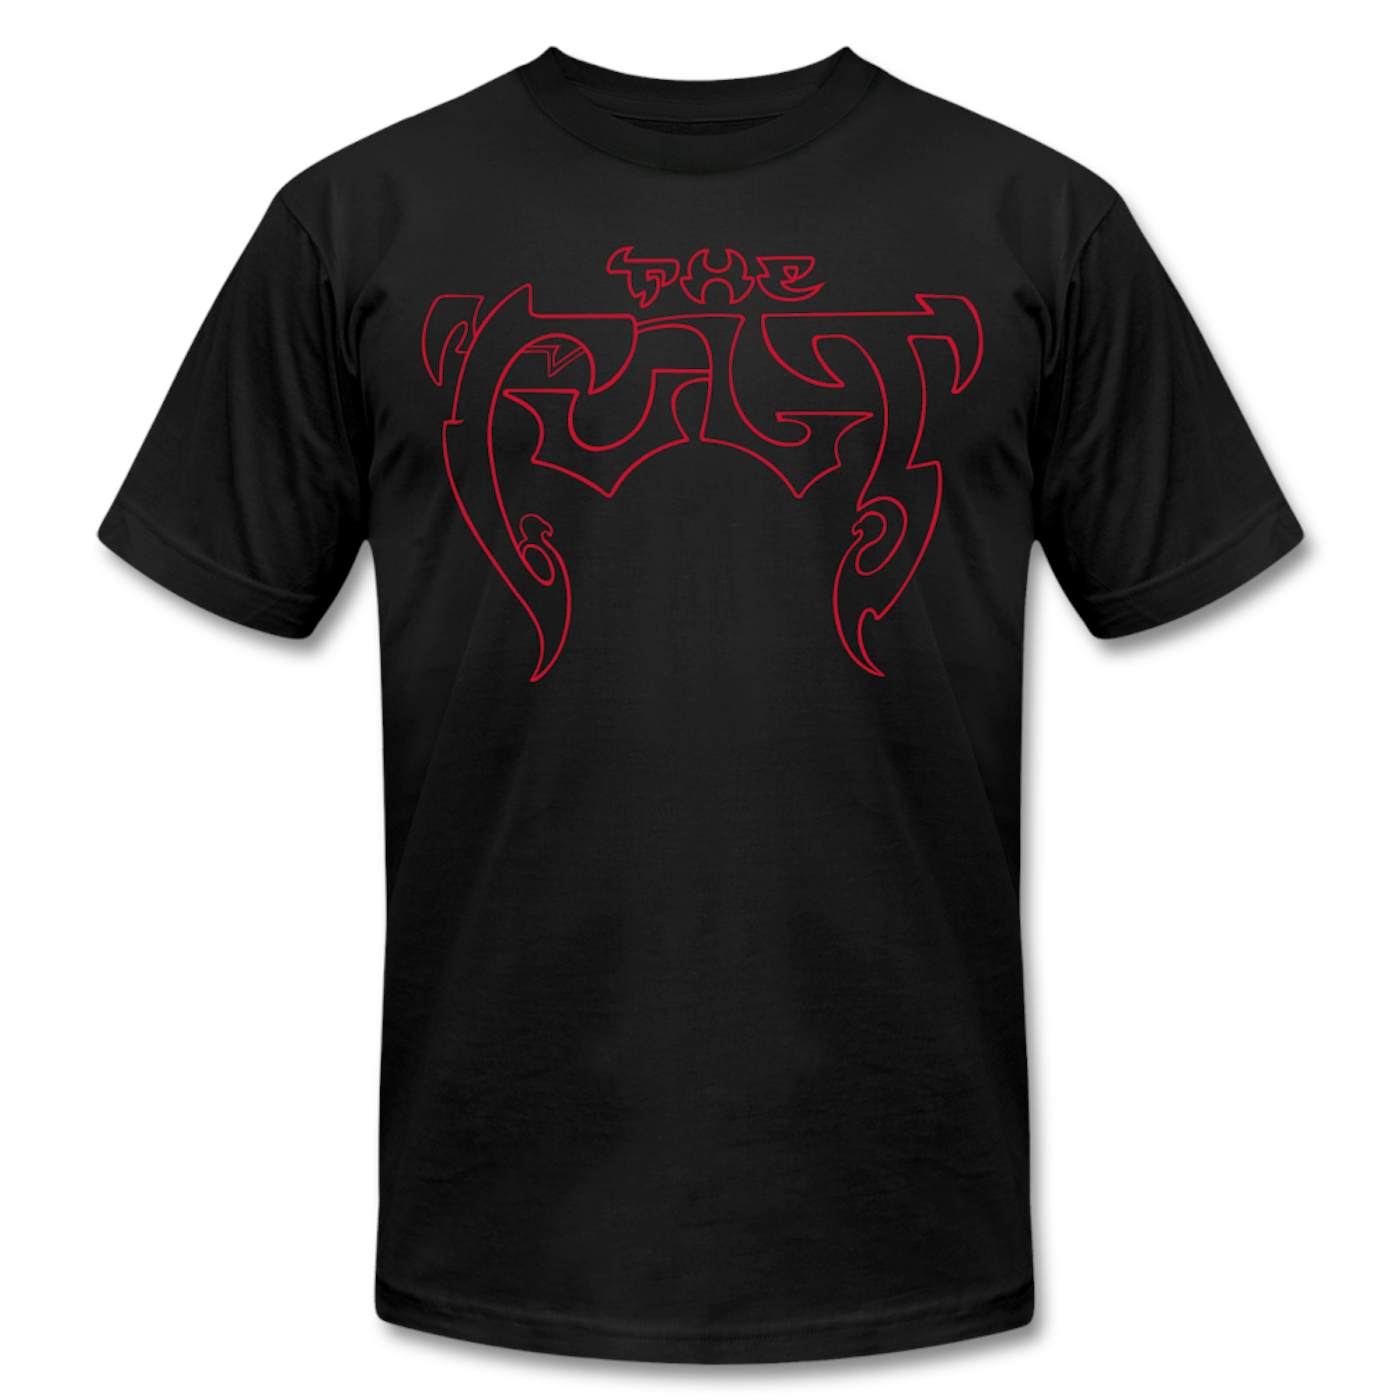 The Cult Black T, Electric Outline Logo